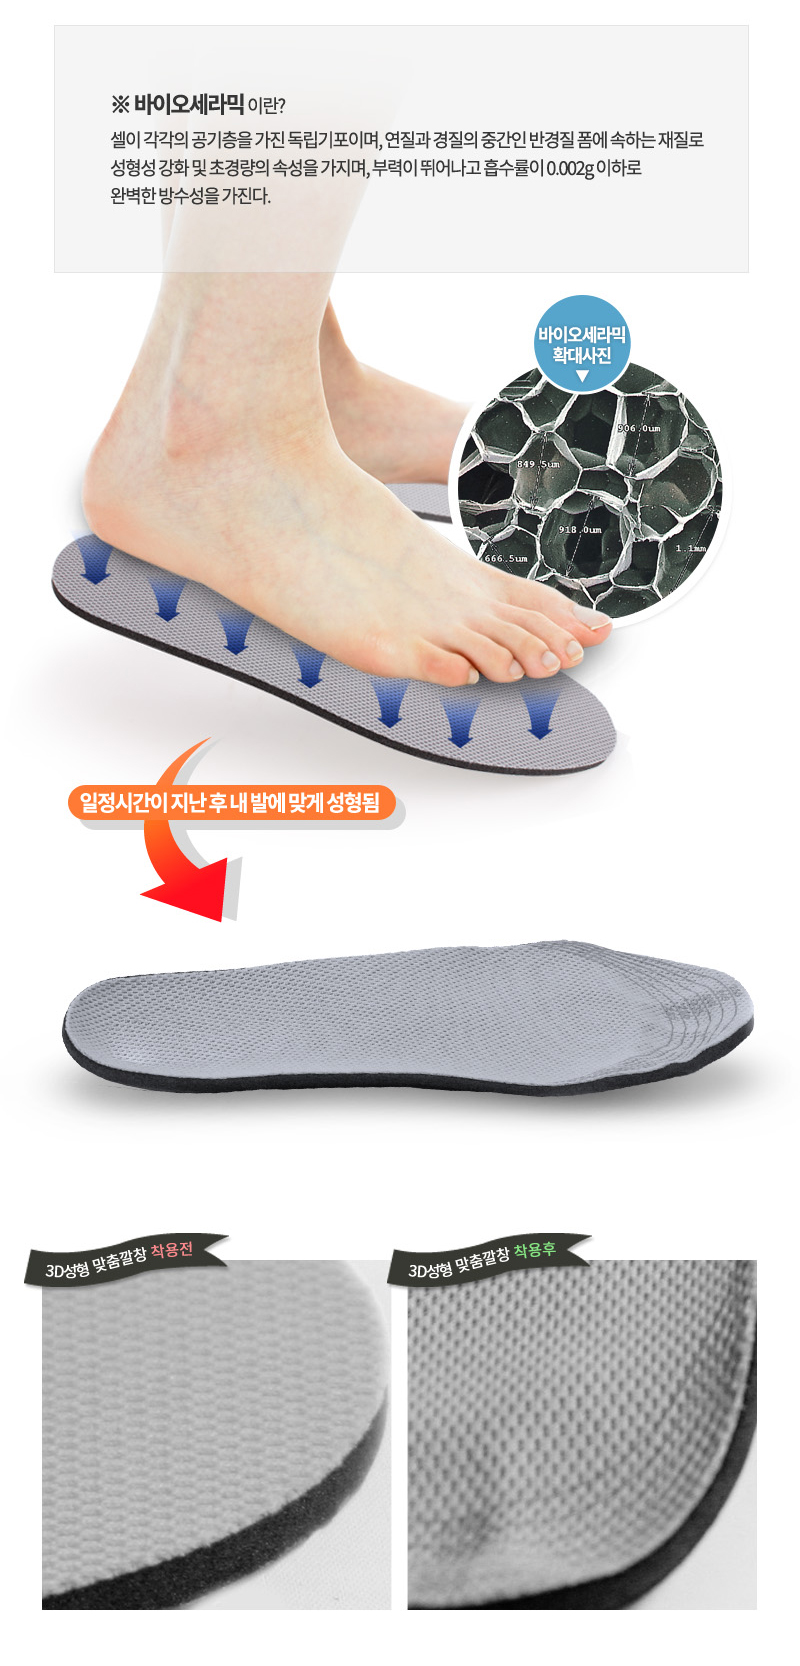 reattachable_slippers_insoles_06.jpg